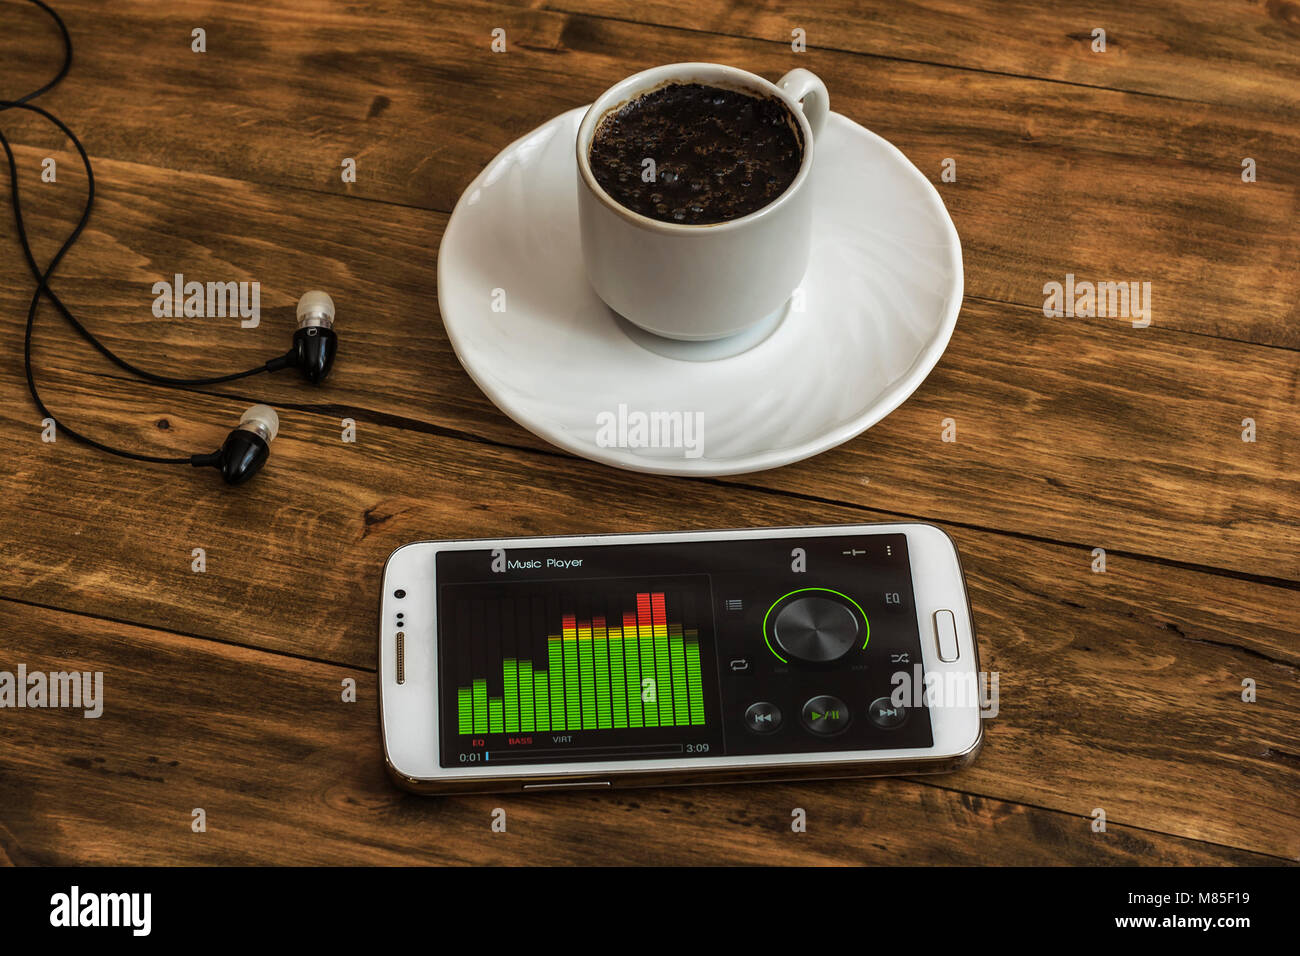 On the wooden surface there is a Cup of black coffee on a saucer, next are headphones and a smartphone with an equalizer Stock Photo